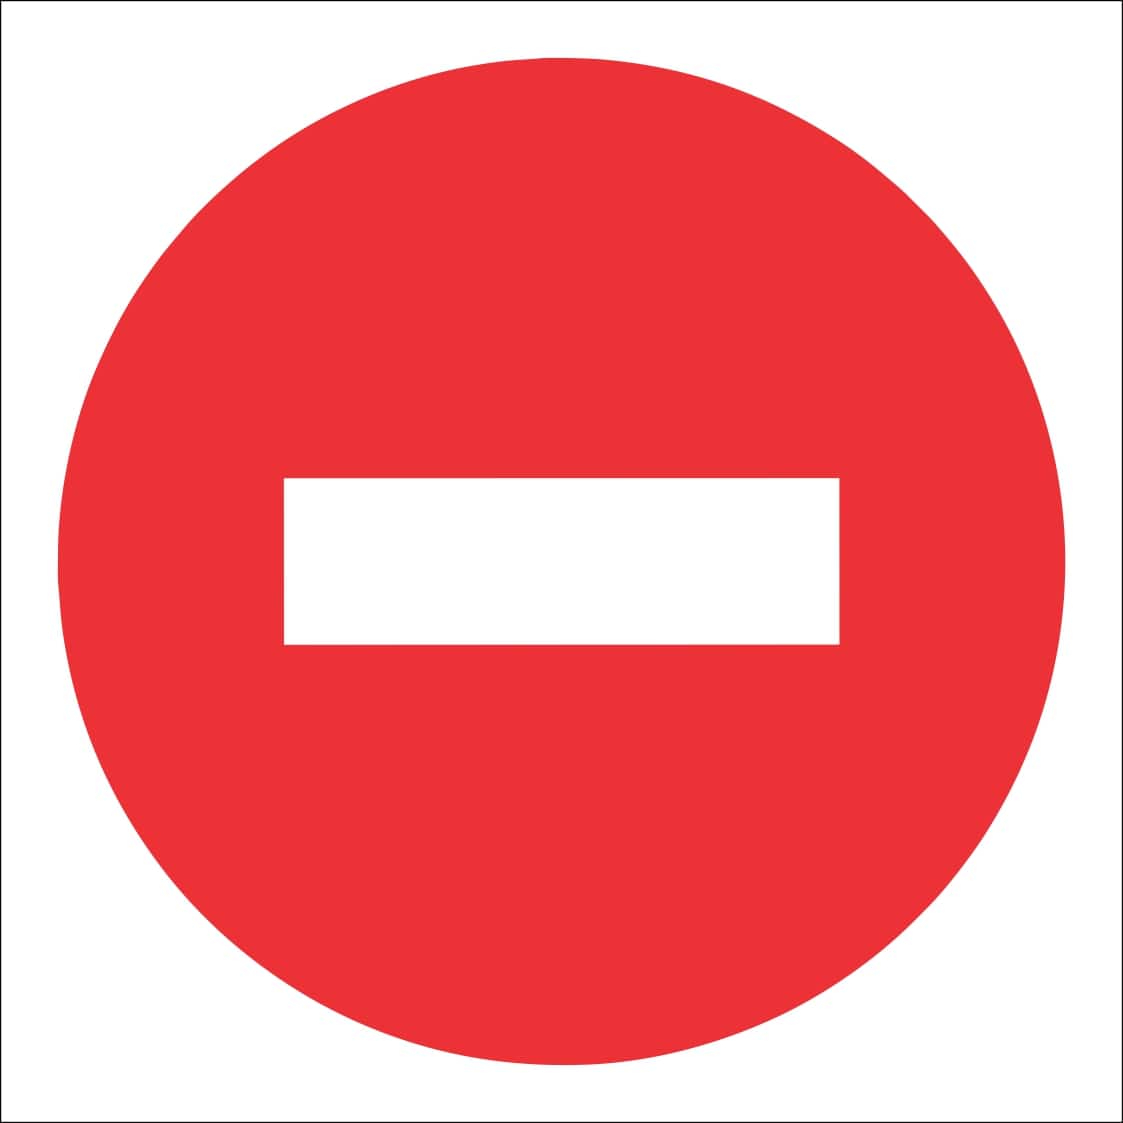 PV6 - No Entry Beyond This Point Safety Sign 190x190, 290x290, 440x440, 660x660, ABS, ChromaDek, Prohibitive Sign, Reflective, Safety Sign Direct Designs